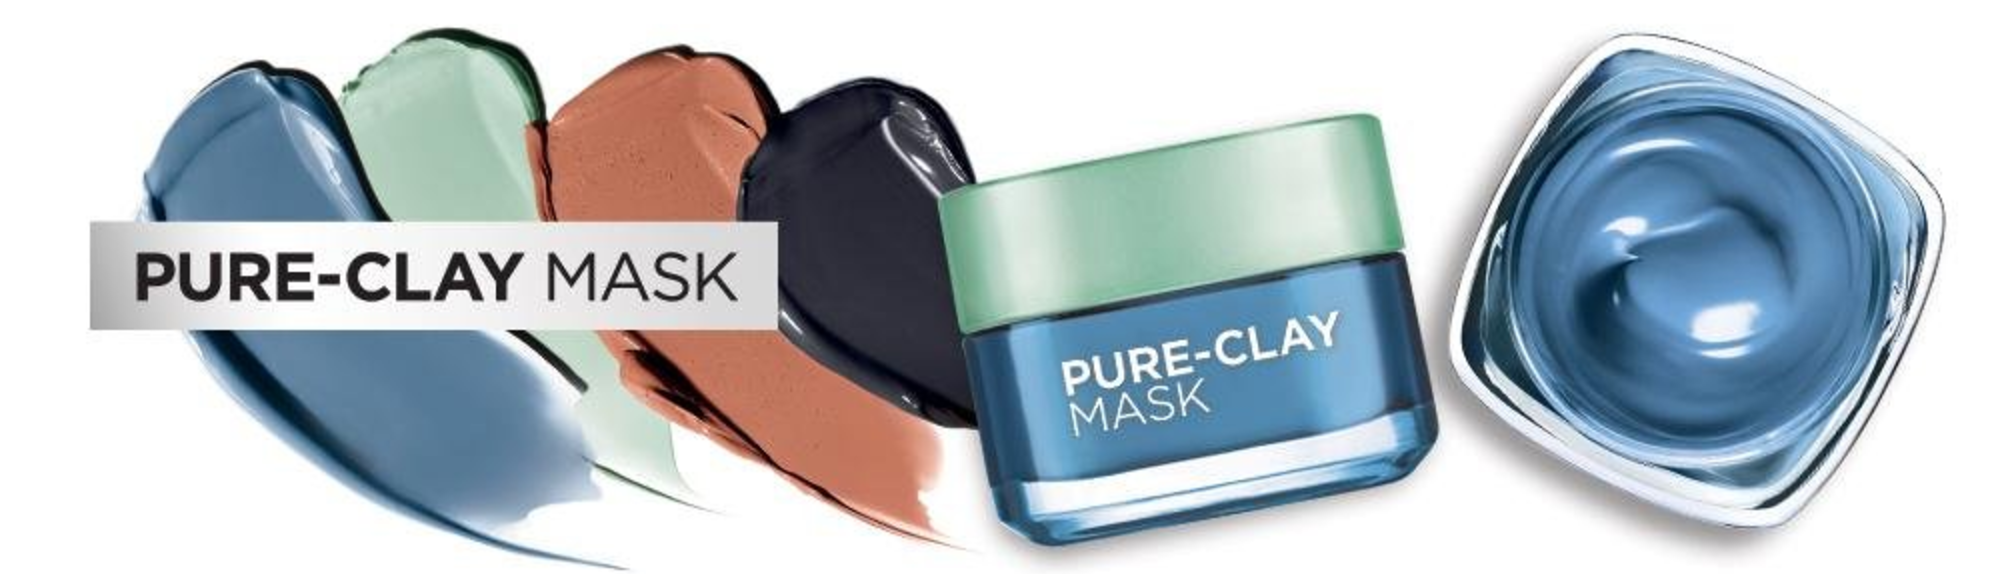 L'Oreal Paris Skin Care Pure Clay Mask Detox and Brighten, 1.7 Ounce as low as $6.30 (reg. $9.99), BEST Price!